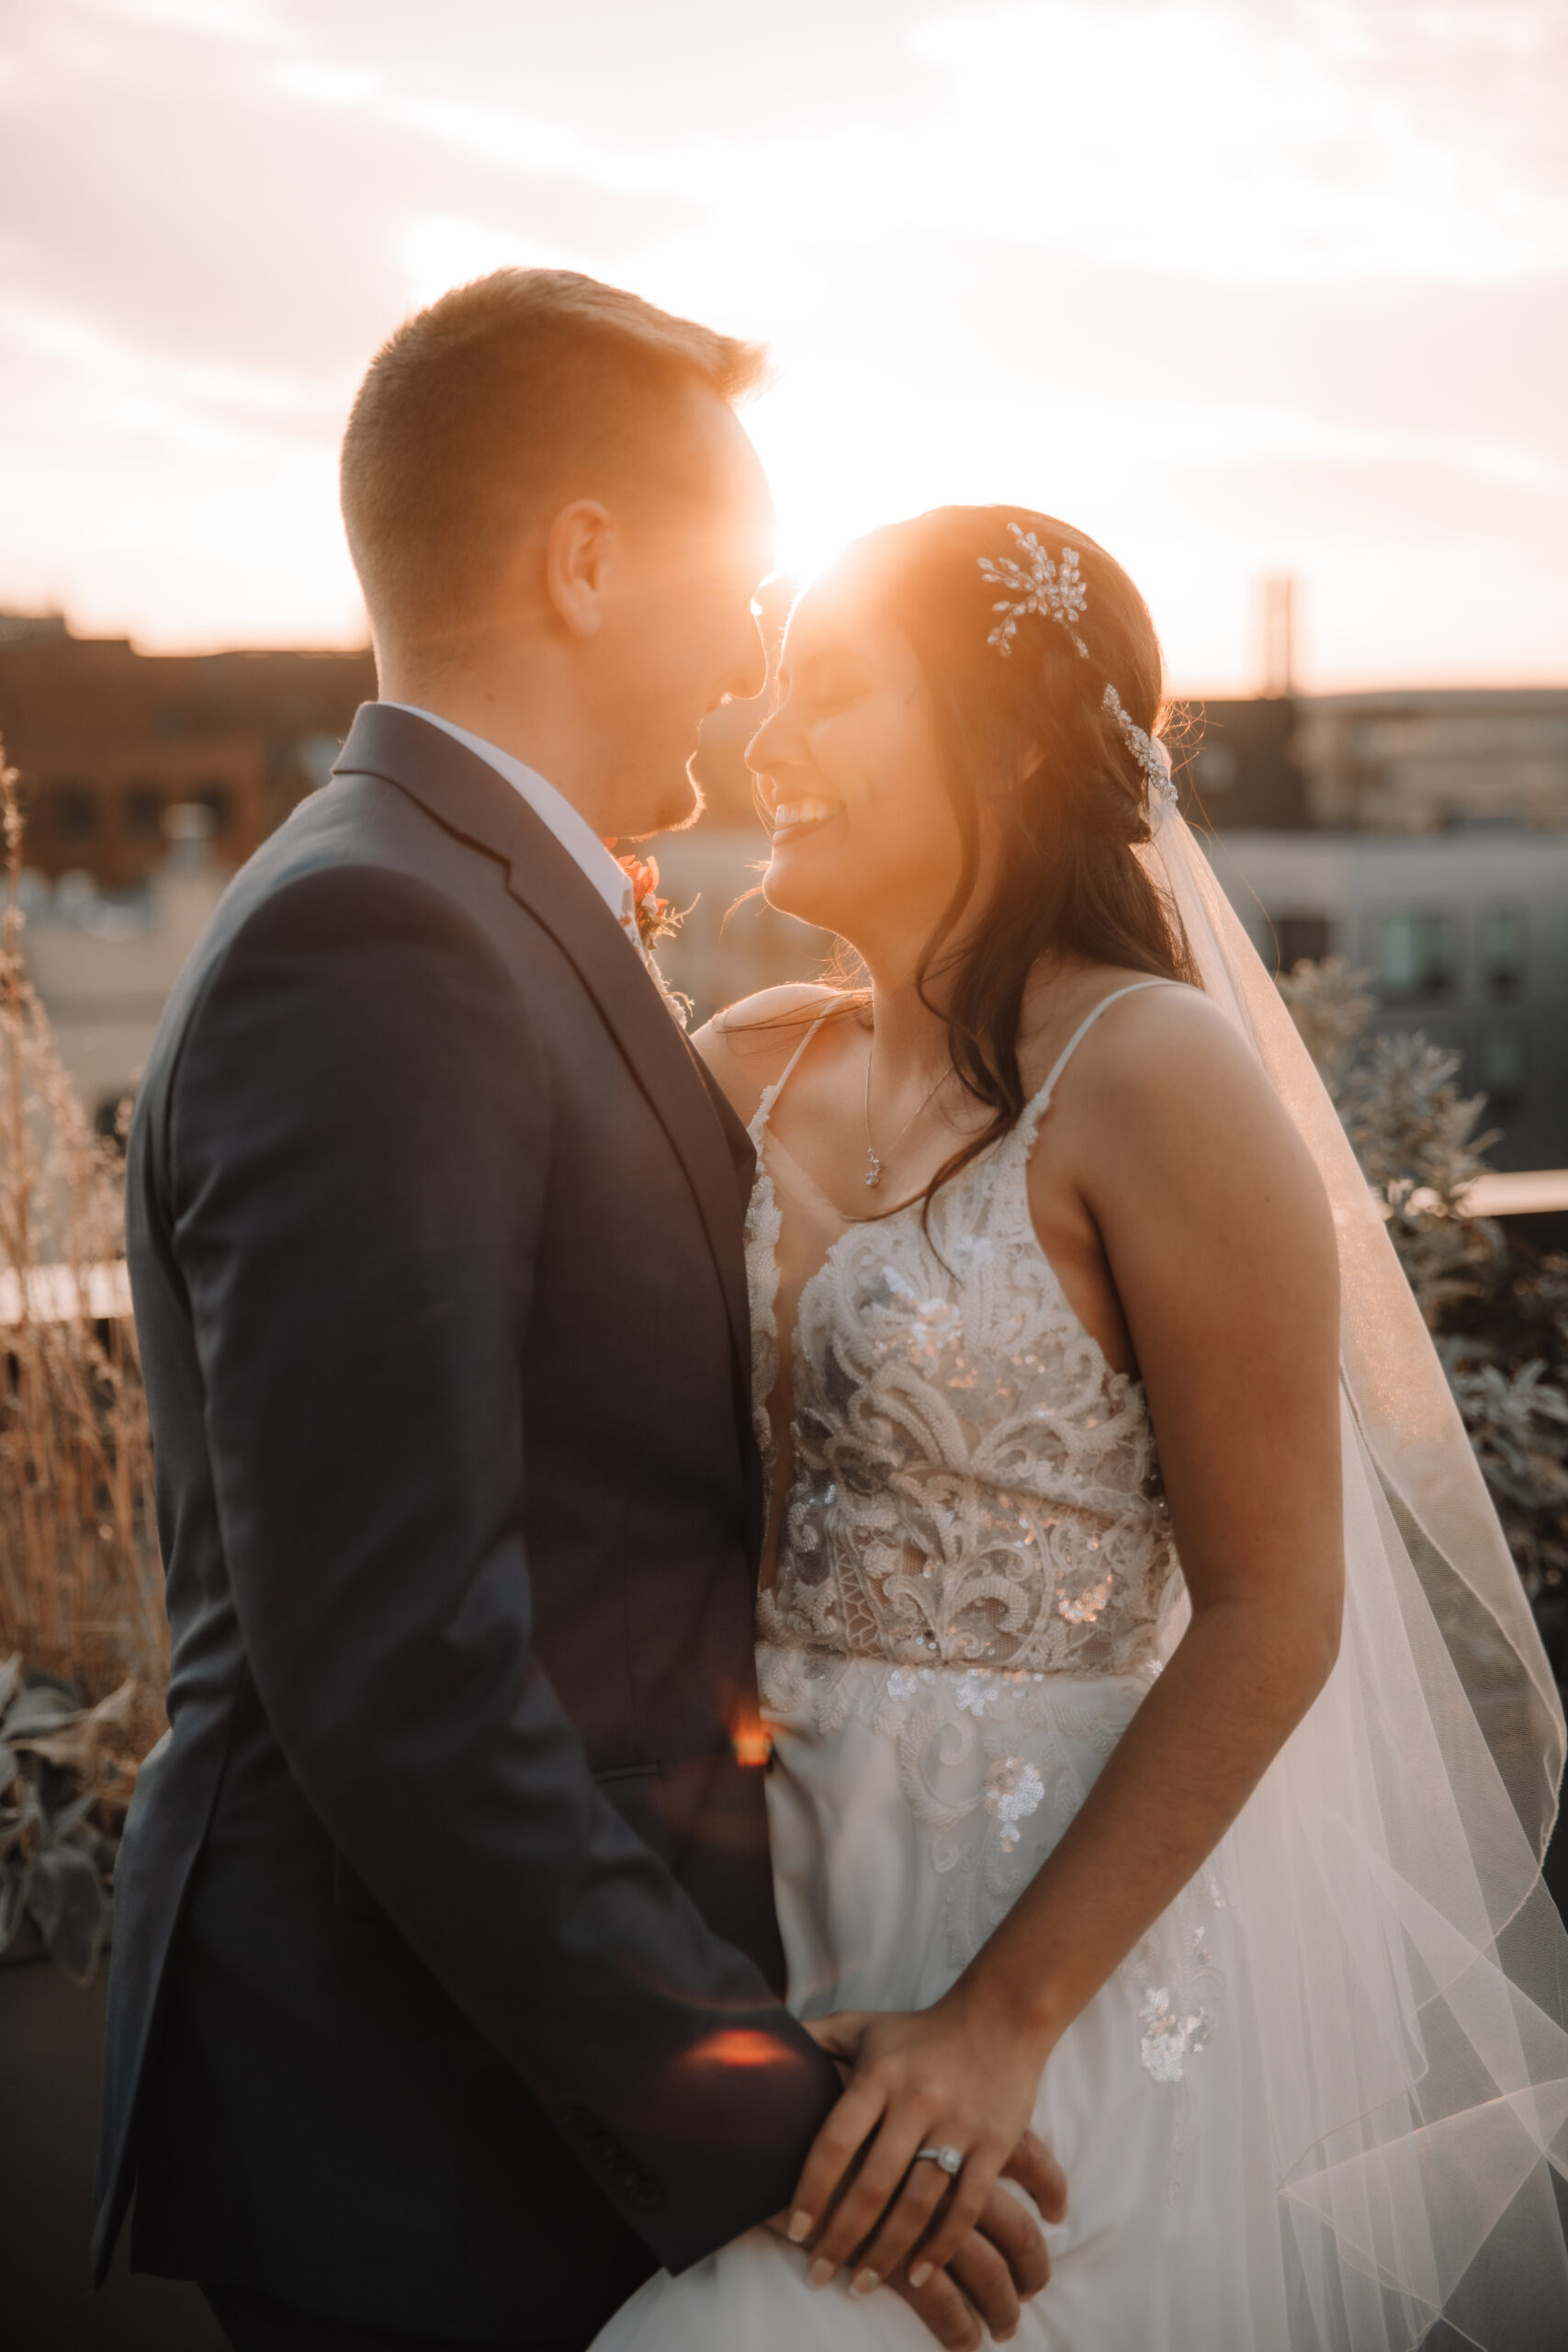 Bride and groom facing each other laughing on top of a deck overlooking the city as the sun sets behind them